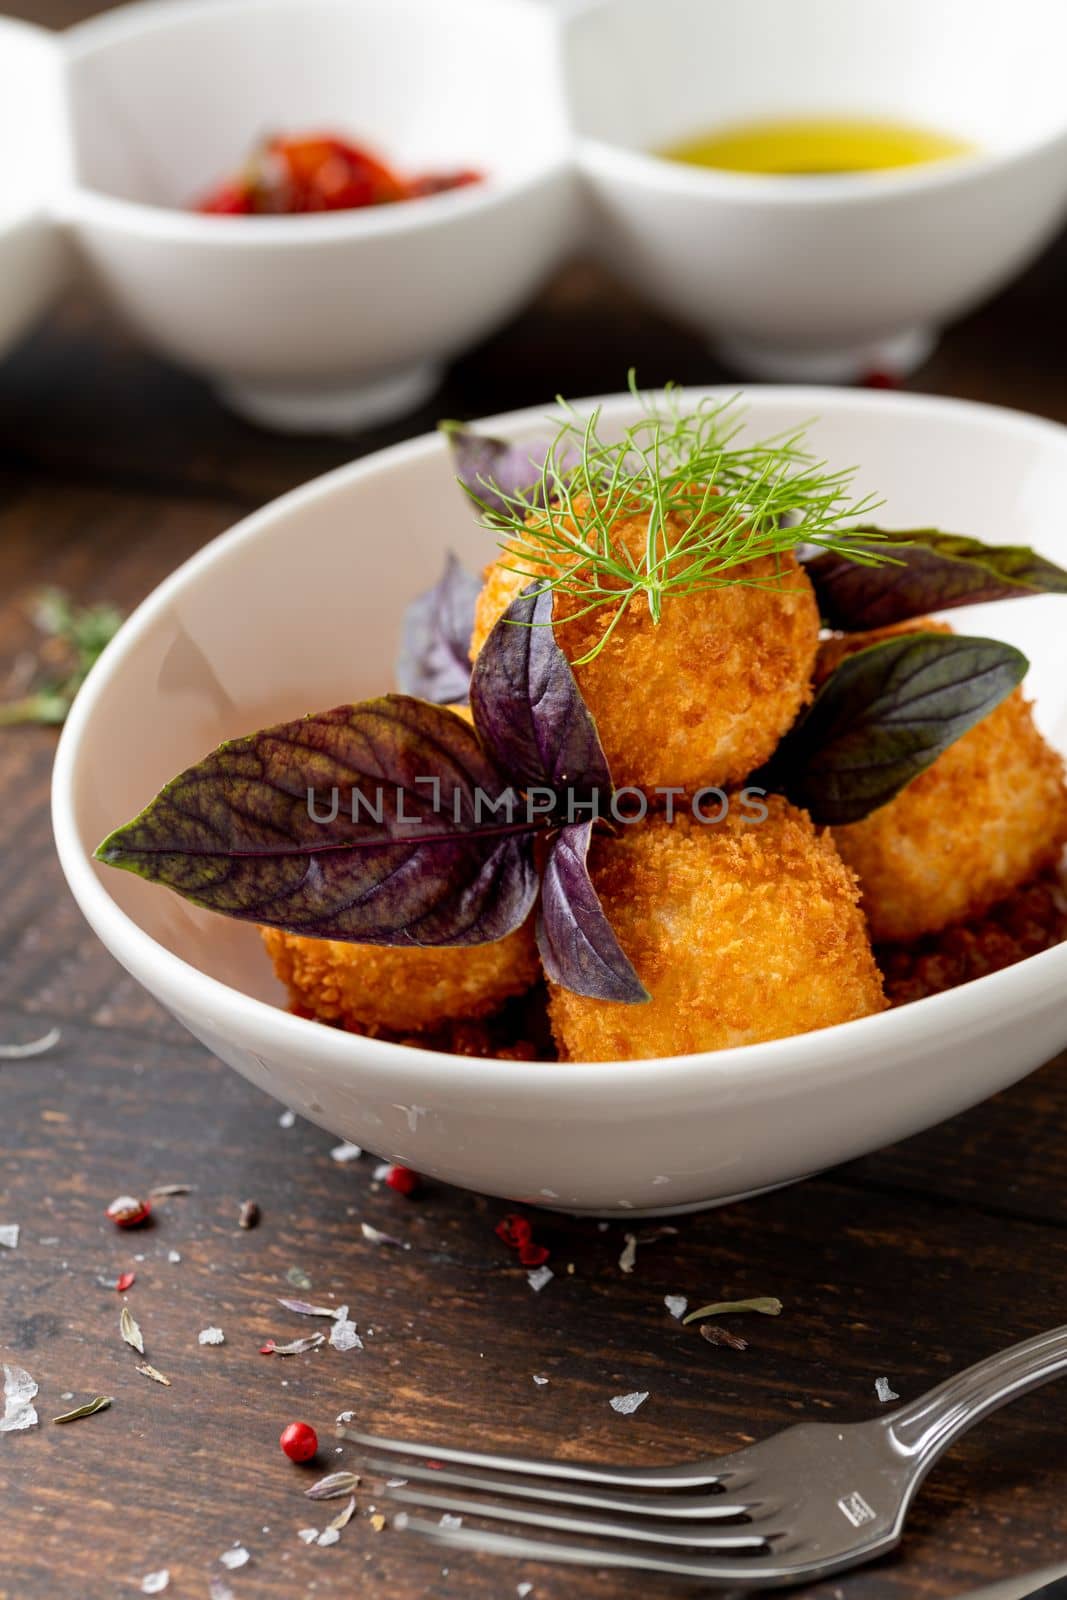 Homemade Fried Sicilian Arancini stuffed with meat, with tomato sauce by Sonat